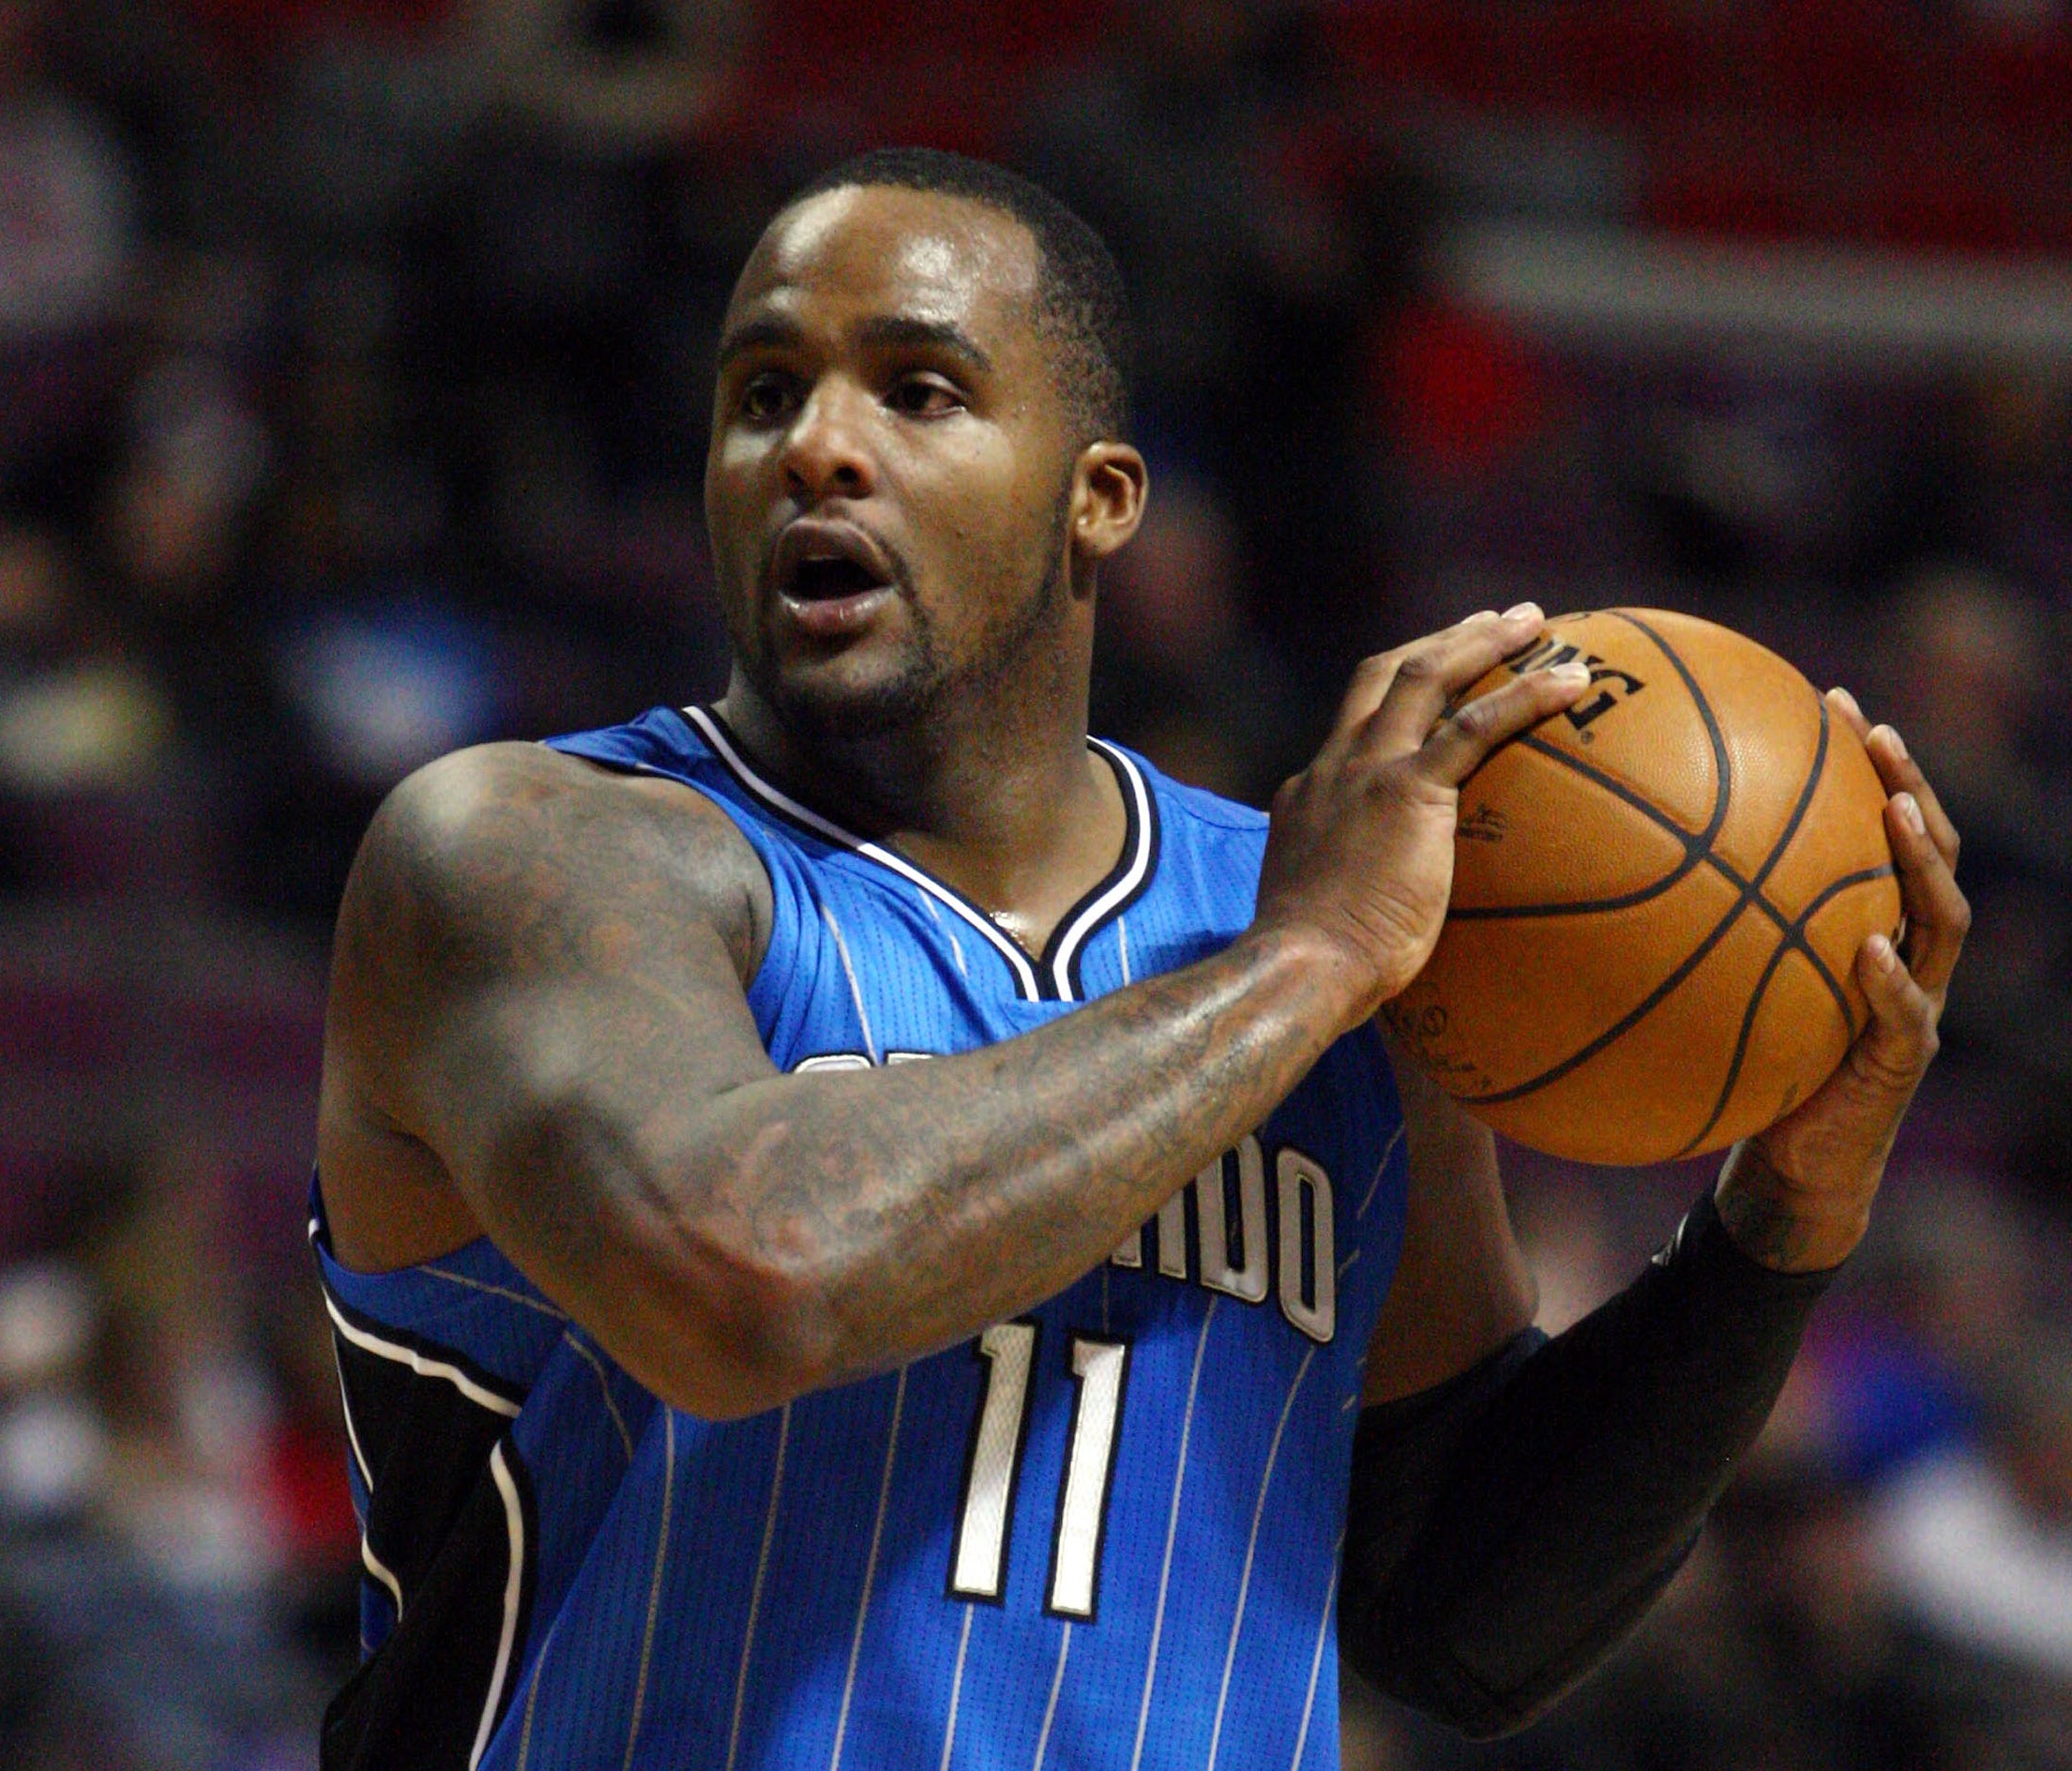 Glen 'Big Baby' Davis faces up to seven years in prison on a felony assault charge.